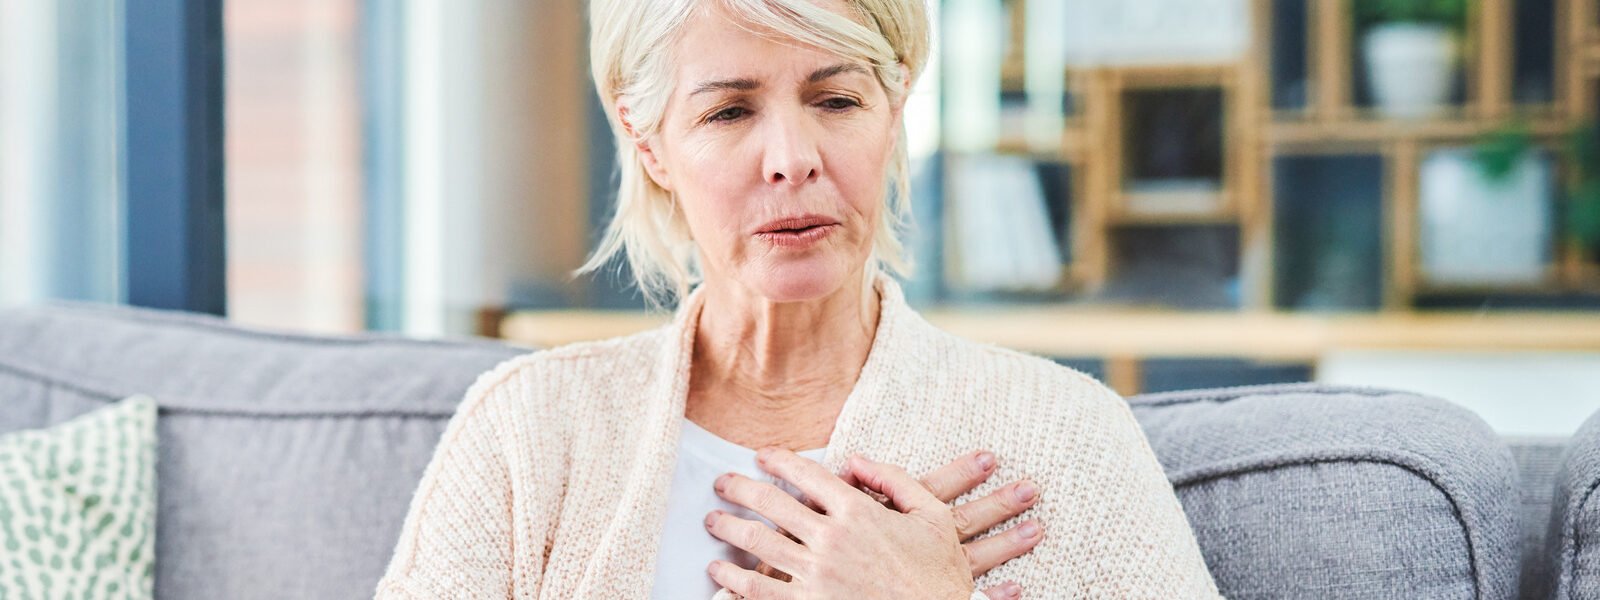 You're More Likely To Have A Heart Attack During This Time Of Year - Health Digest